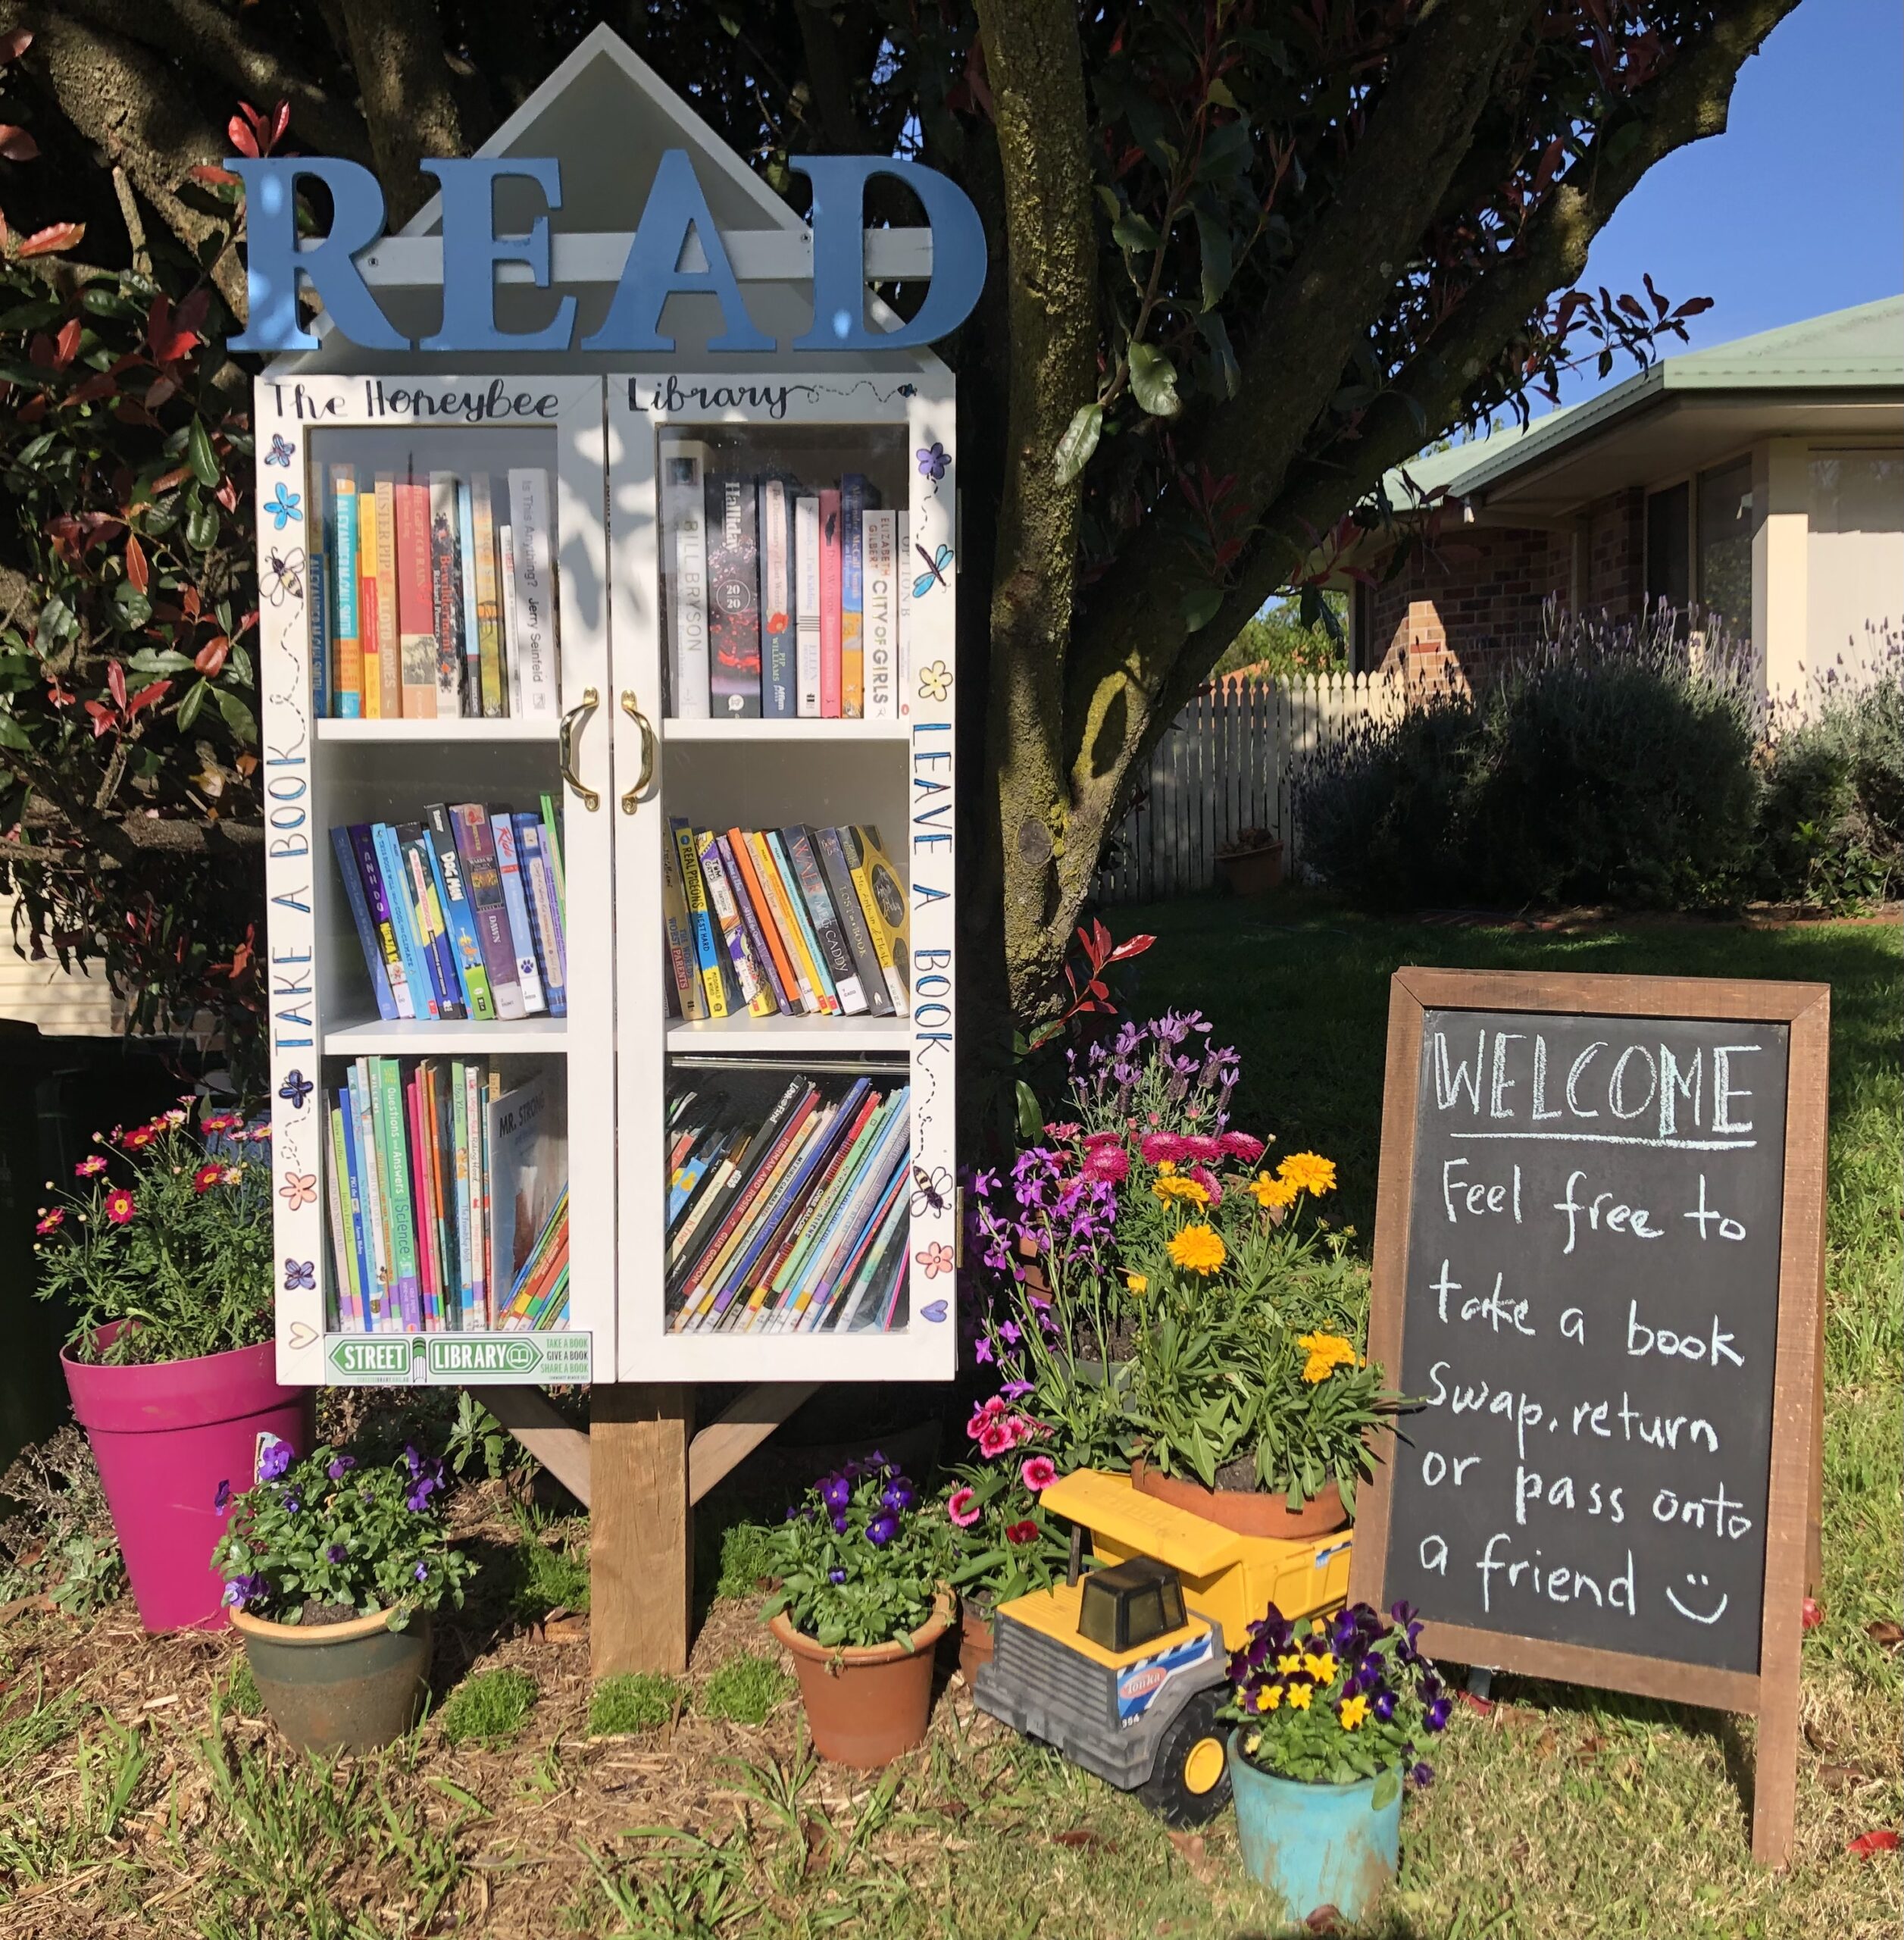 A street library full of books